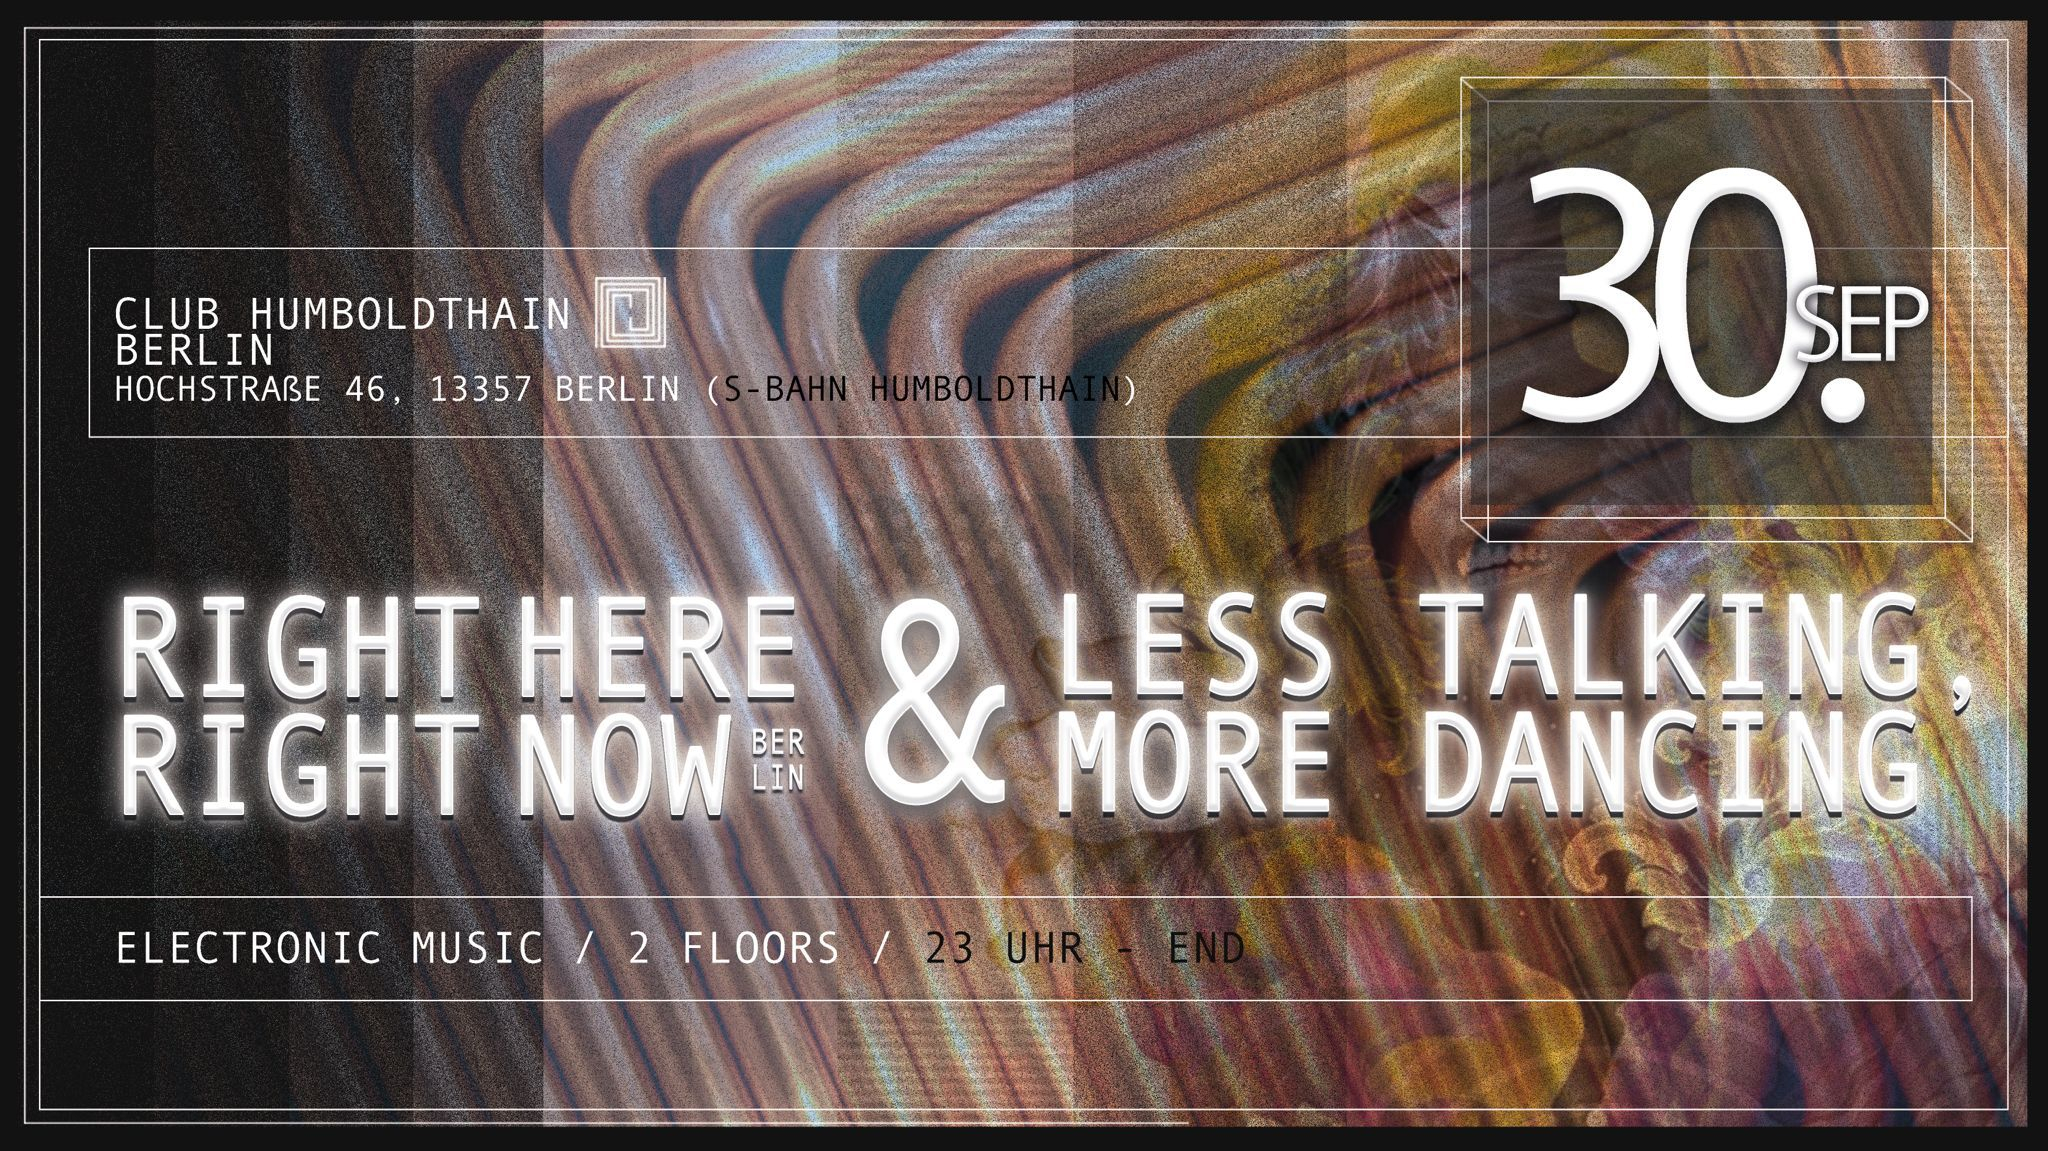 Right here, right now meets Less talking dancing - Flyer front